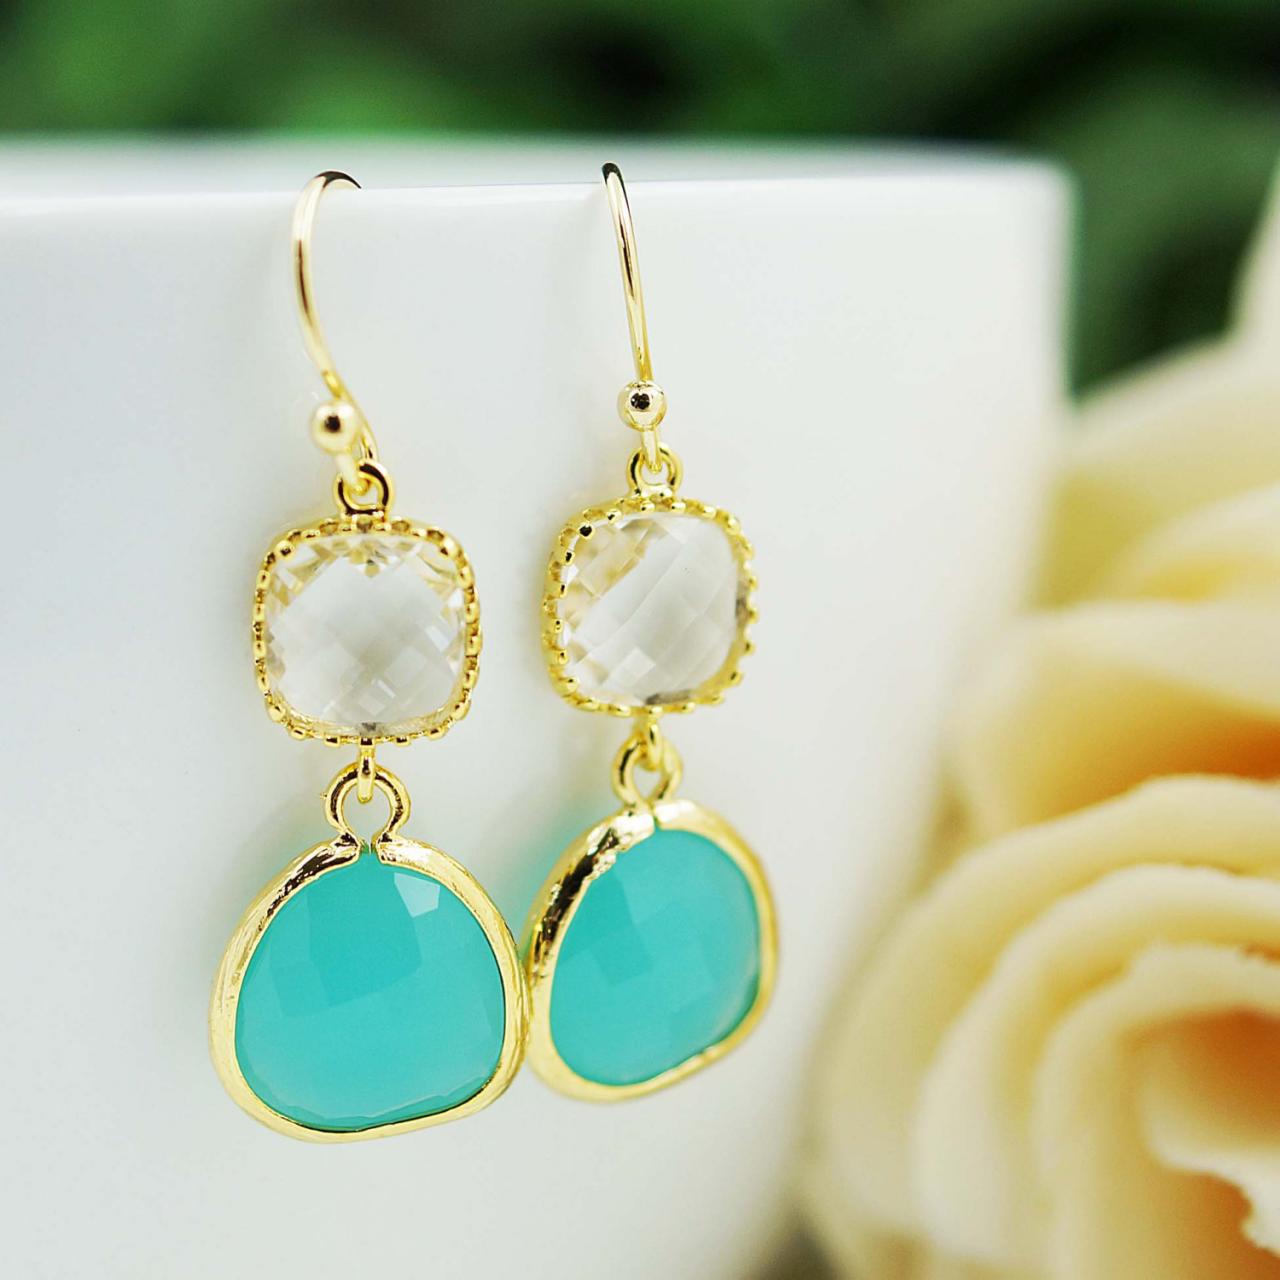 Wedding Jewelry Bridesmaid Gift Bridesmaid Earrings Dangle Earrings Gold Framed Clear White And Mint Opal Glass Drop Earrings